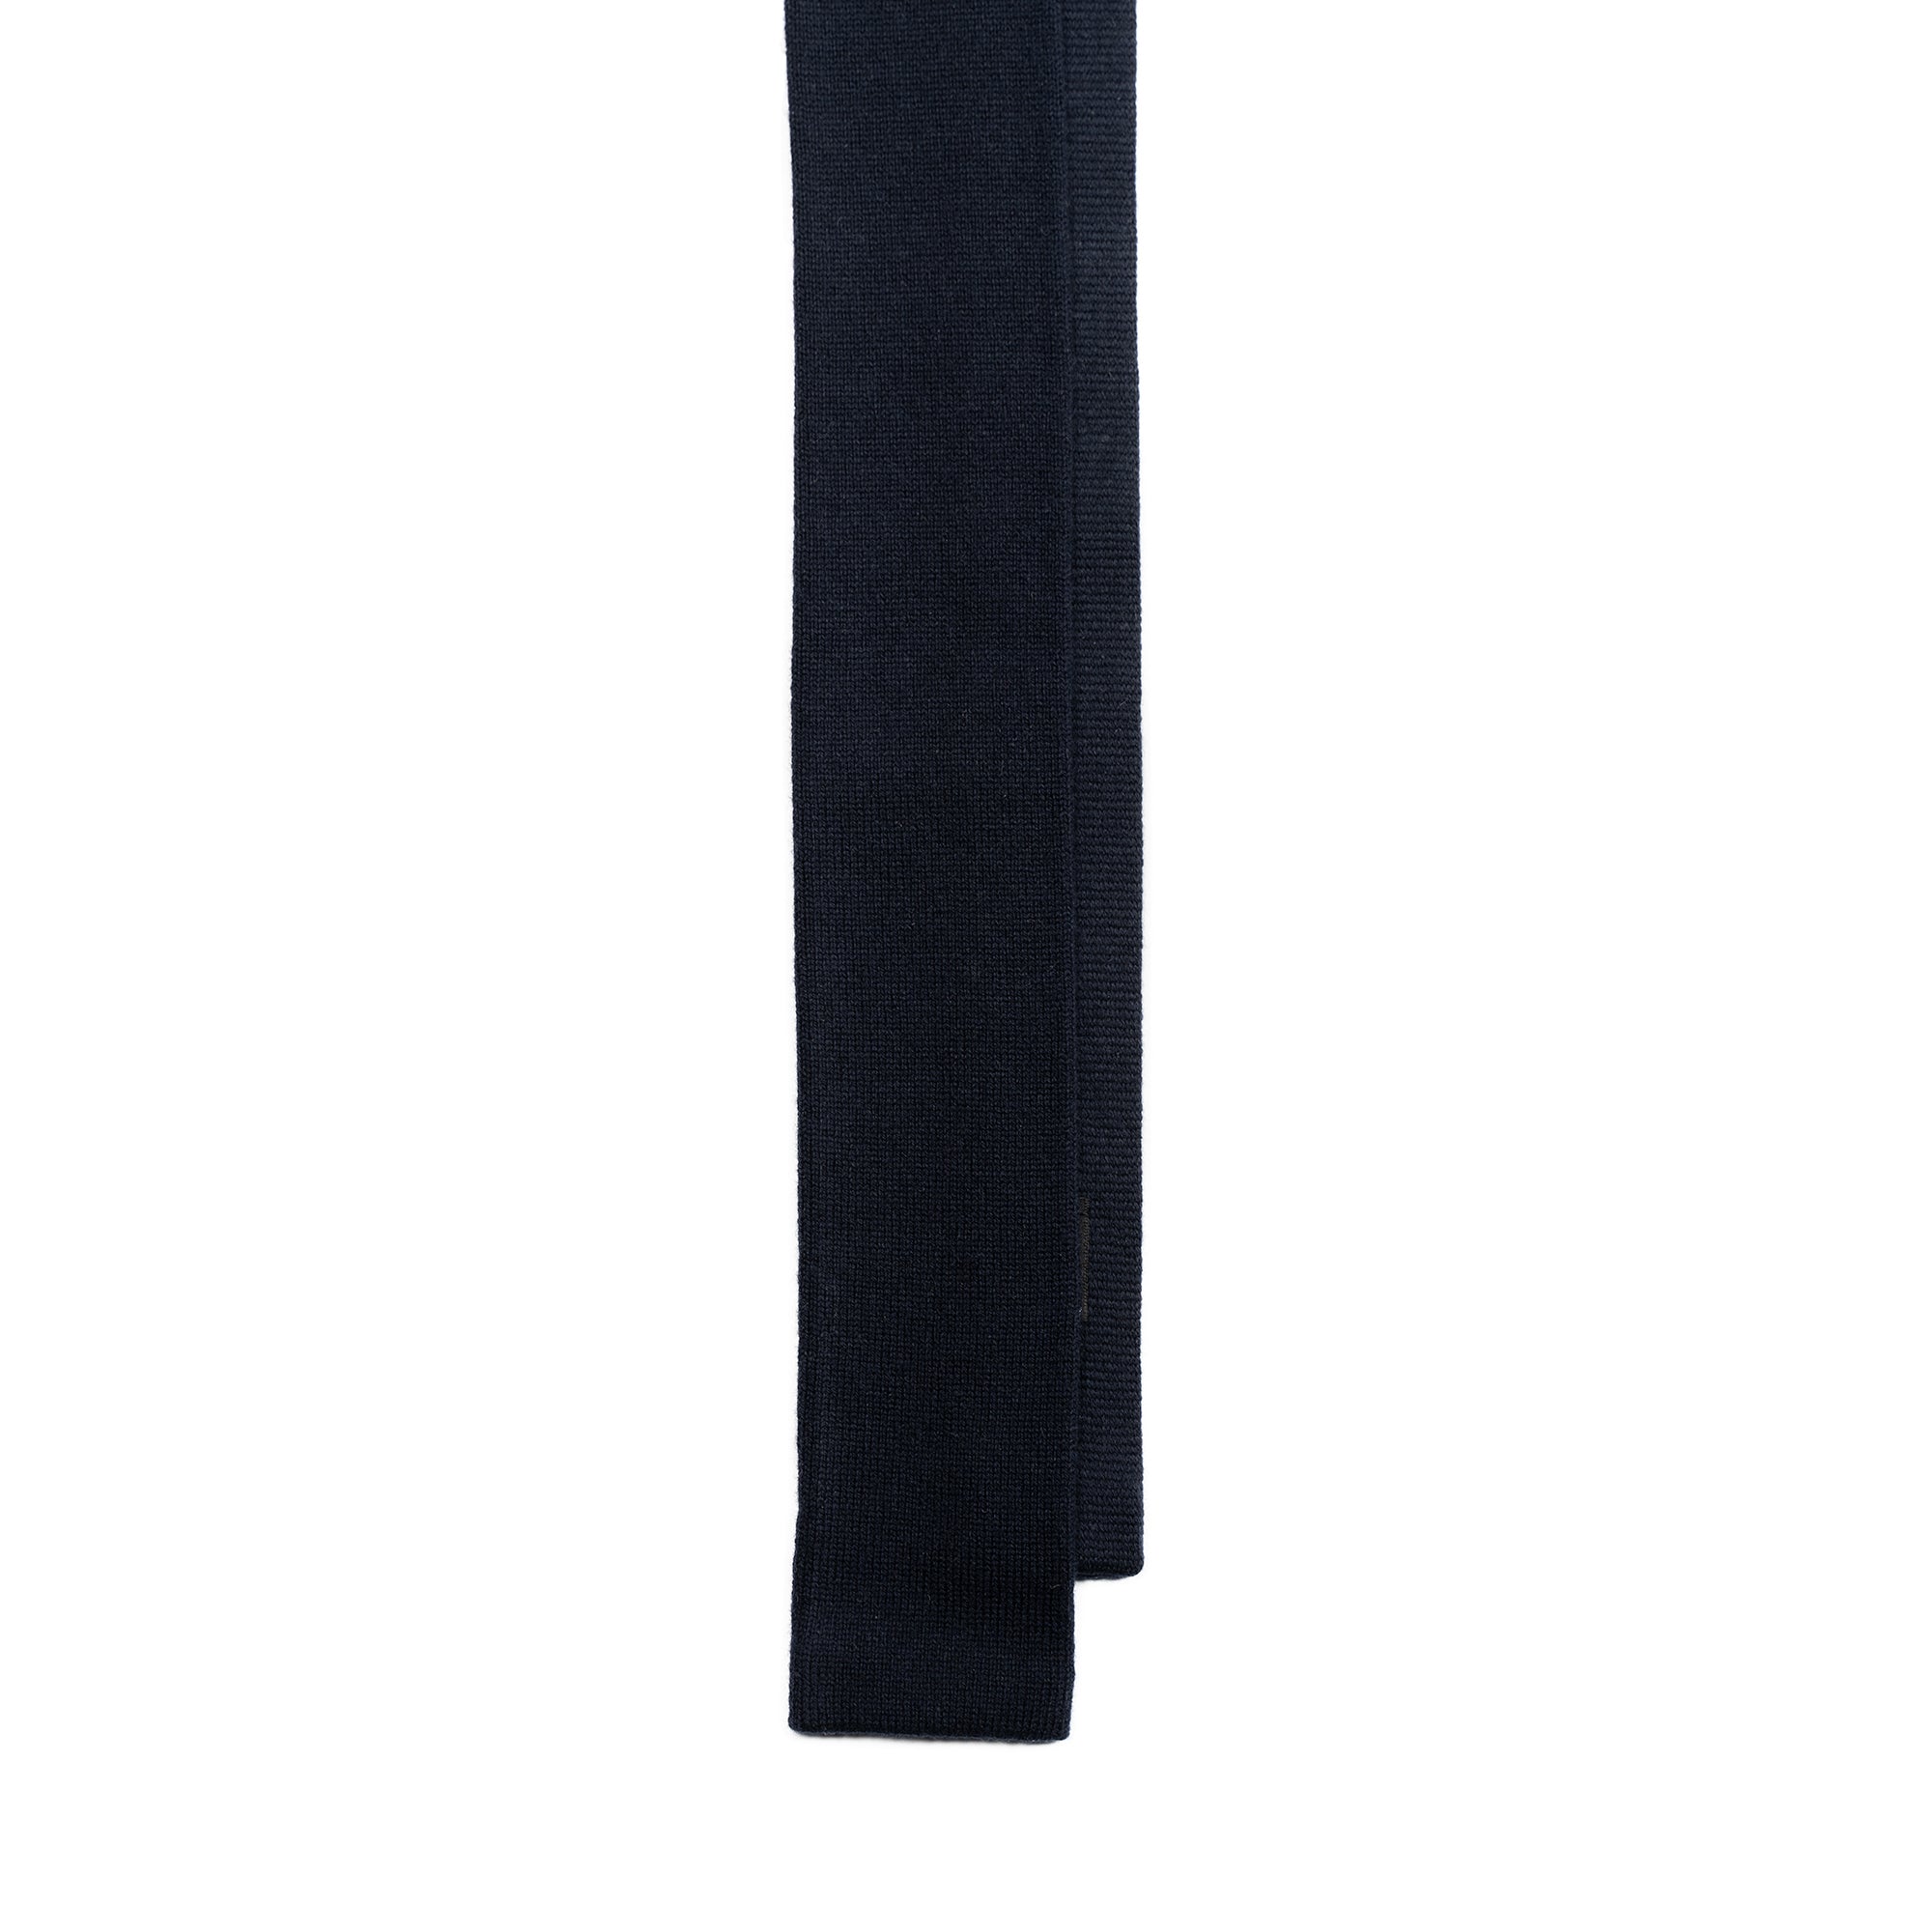 Ties - Navy Cashmere Knit